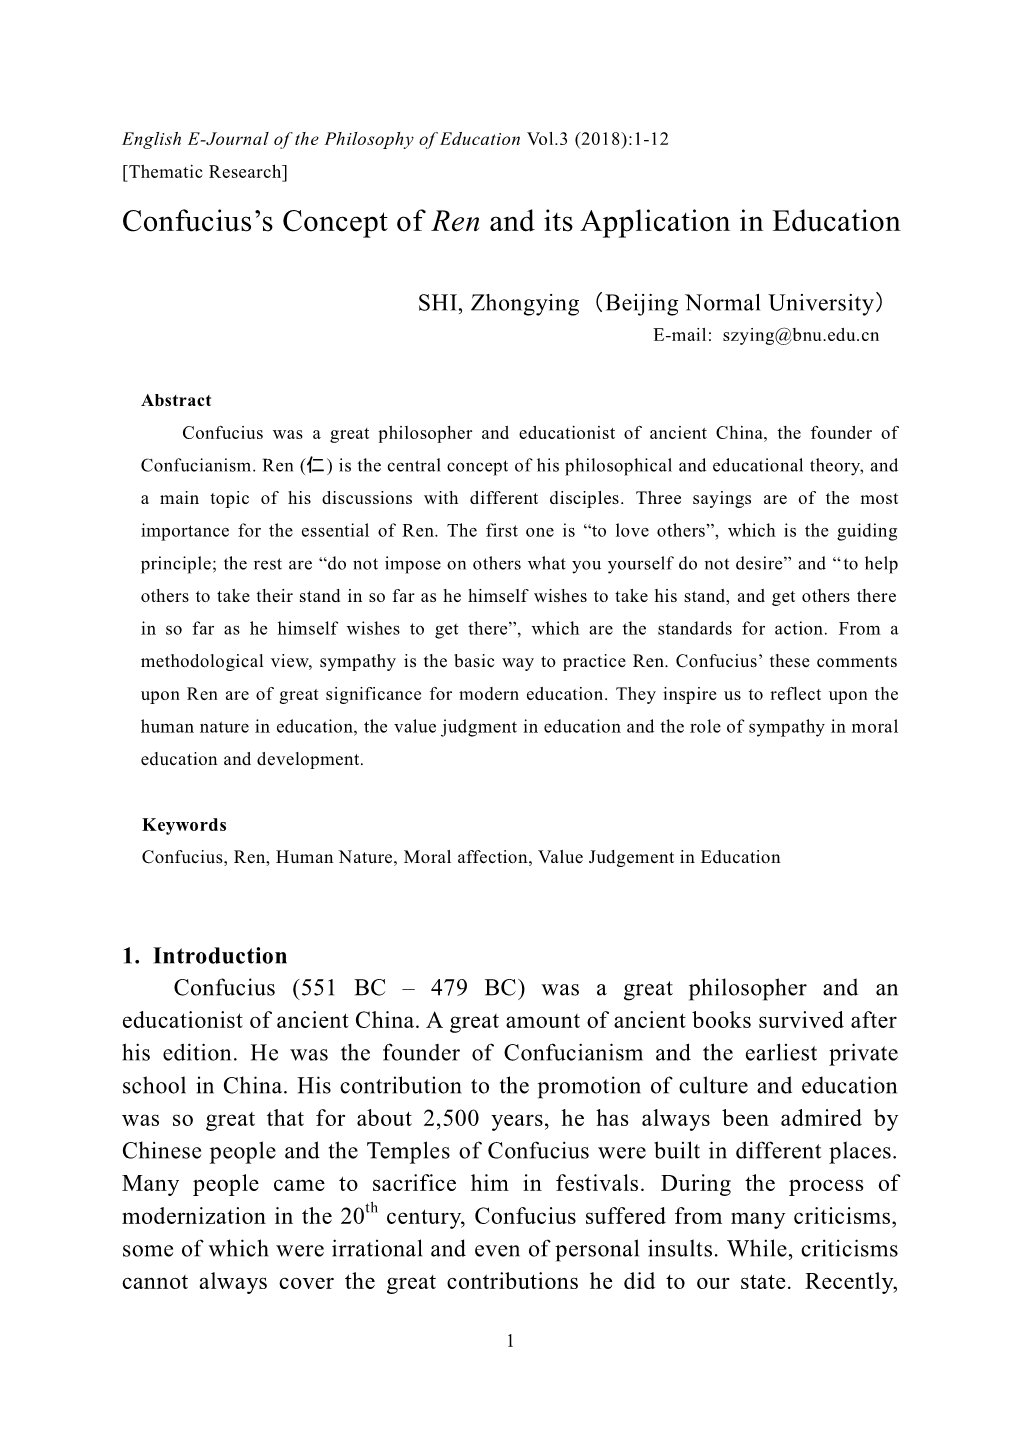 Confucius's Concept of Ren and Its Application in Education